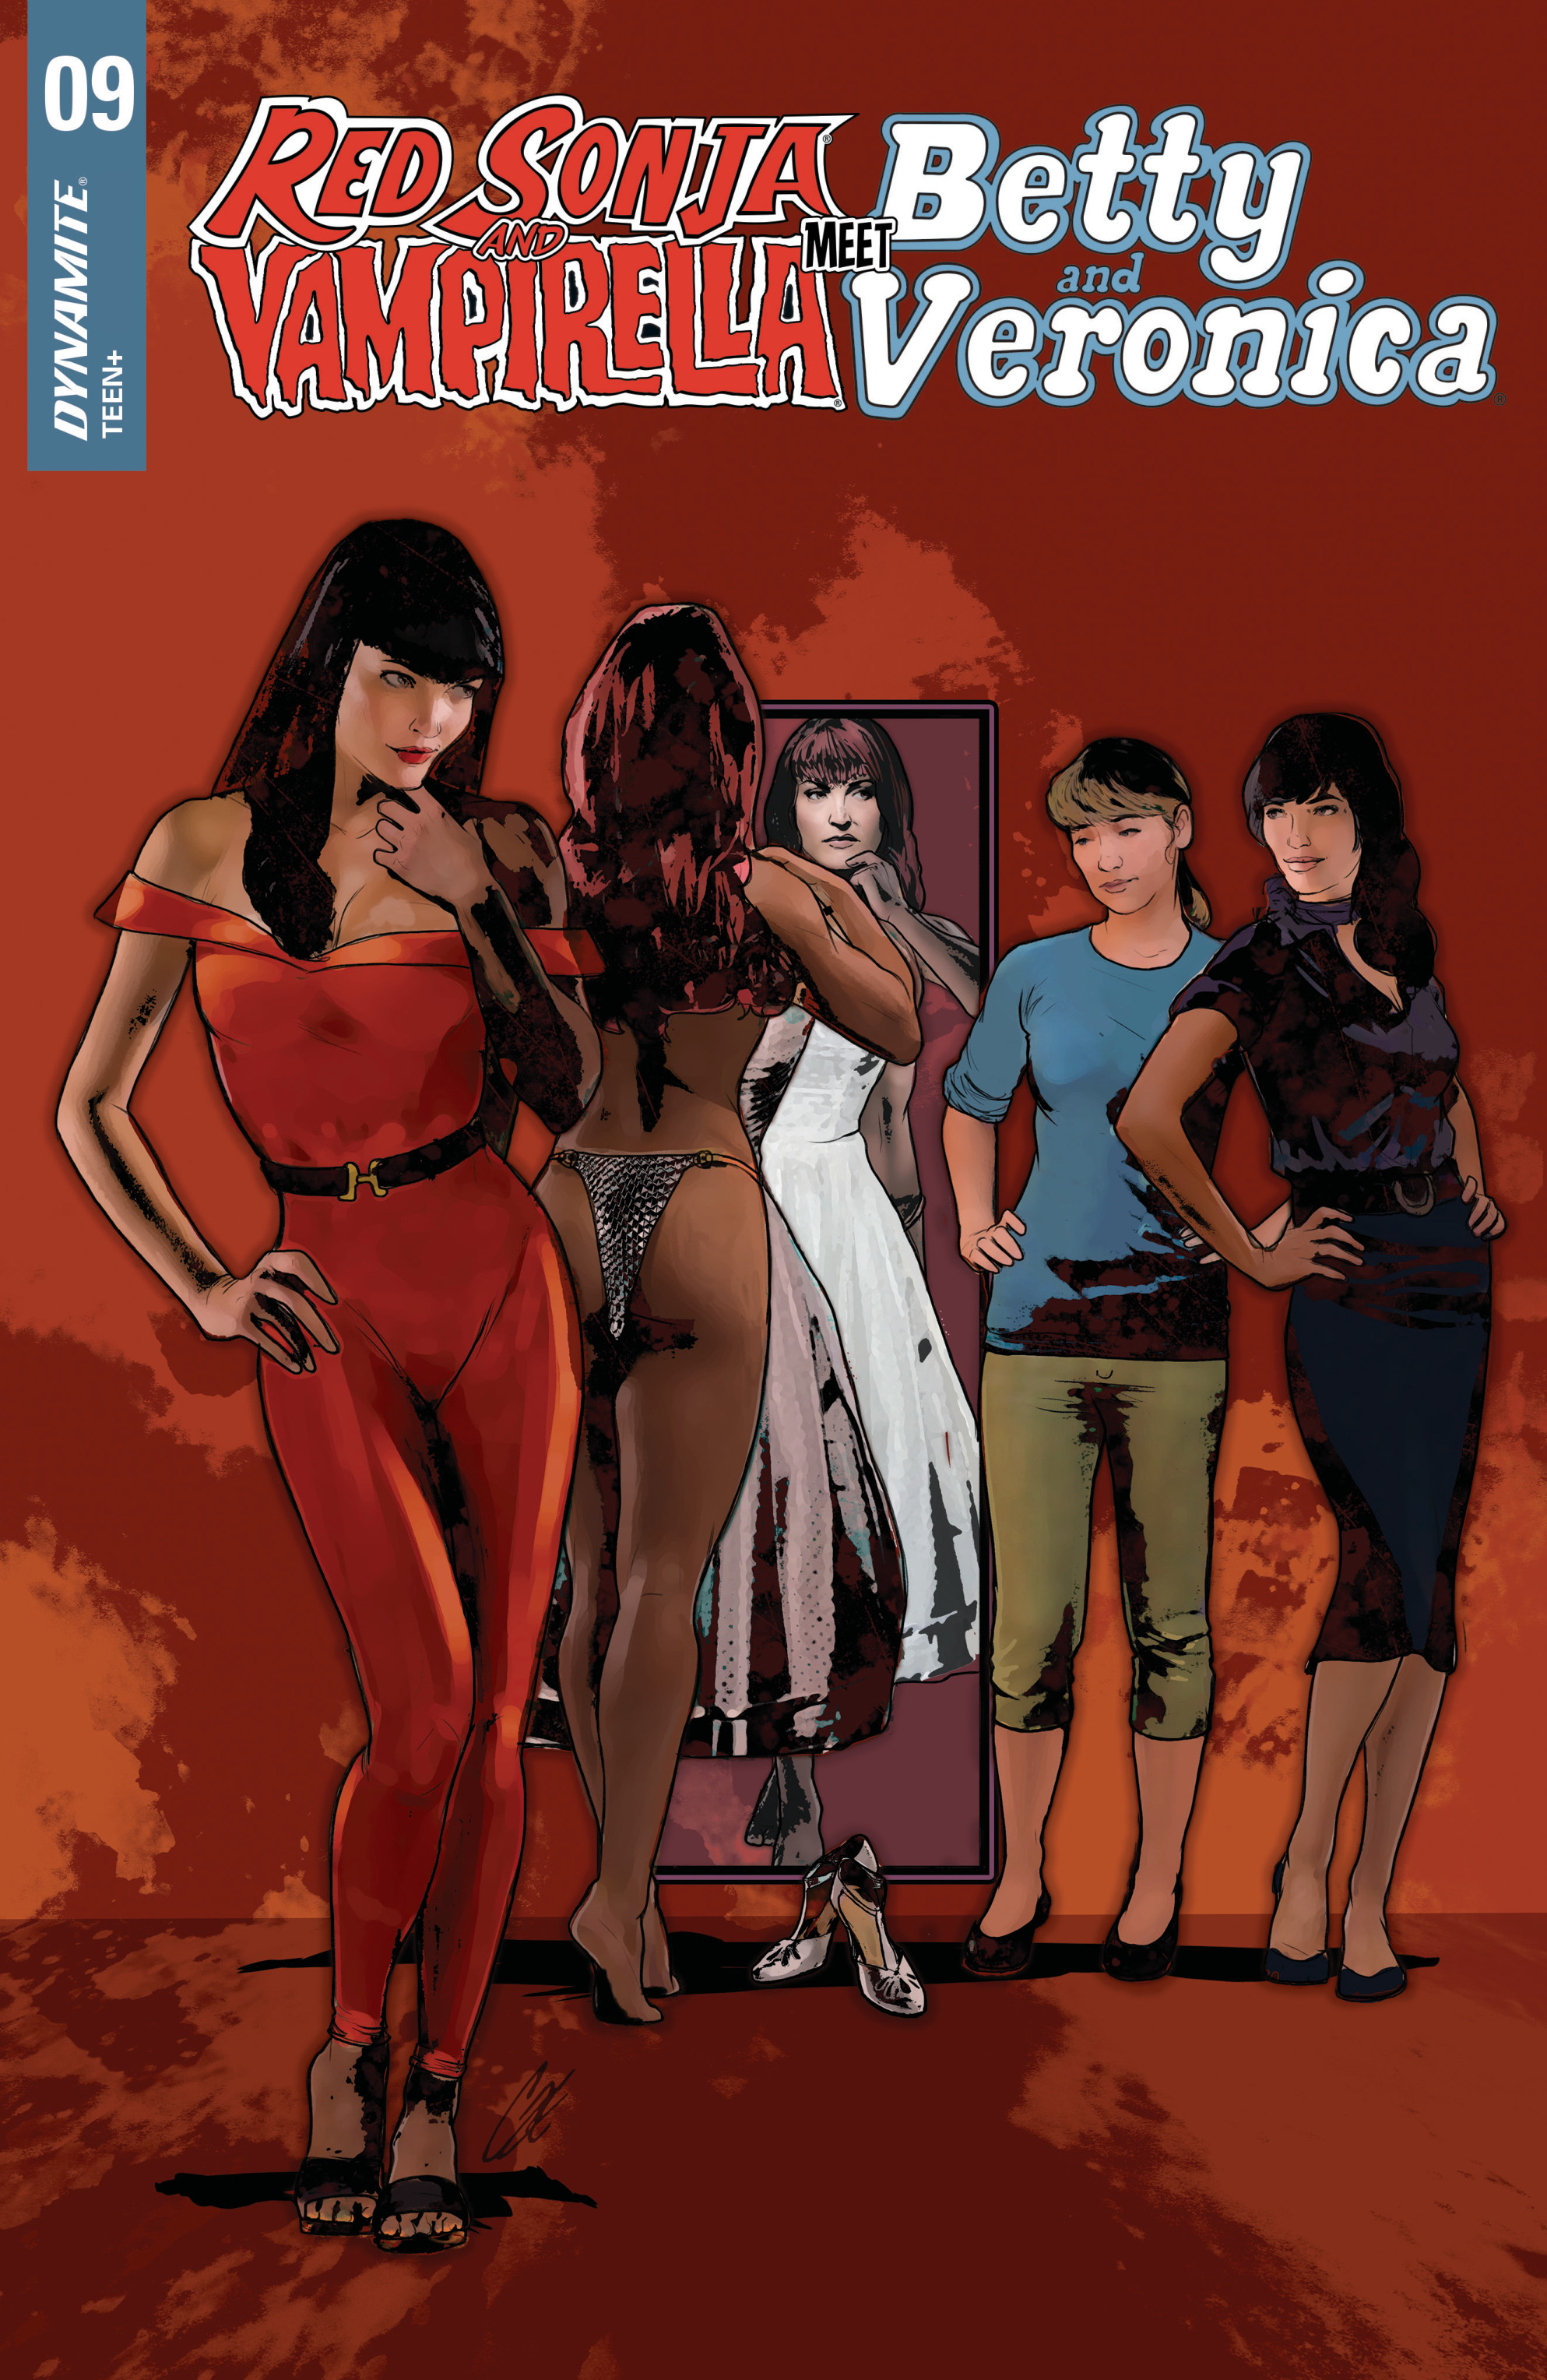 Read online Red Sonja and Vampirella Meet Betty and Veronica comic -  Issue #9 - 5